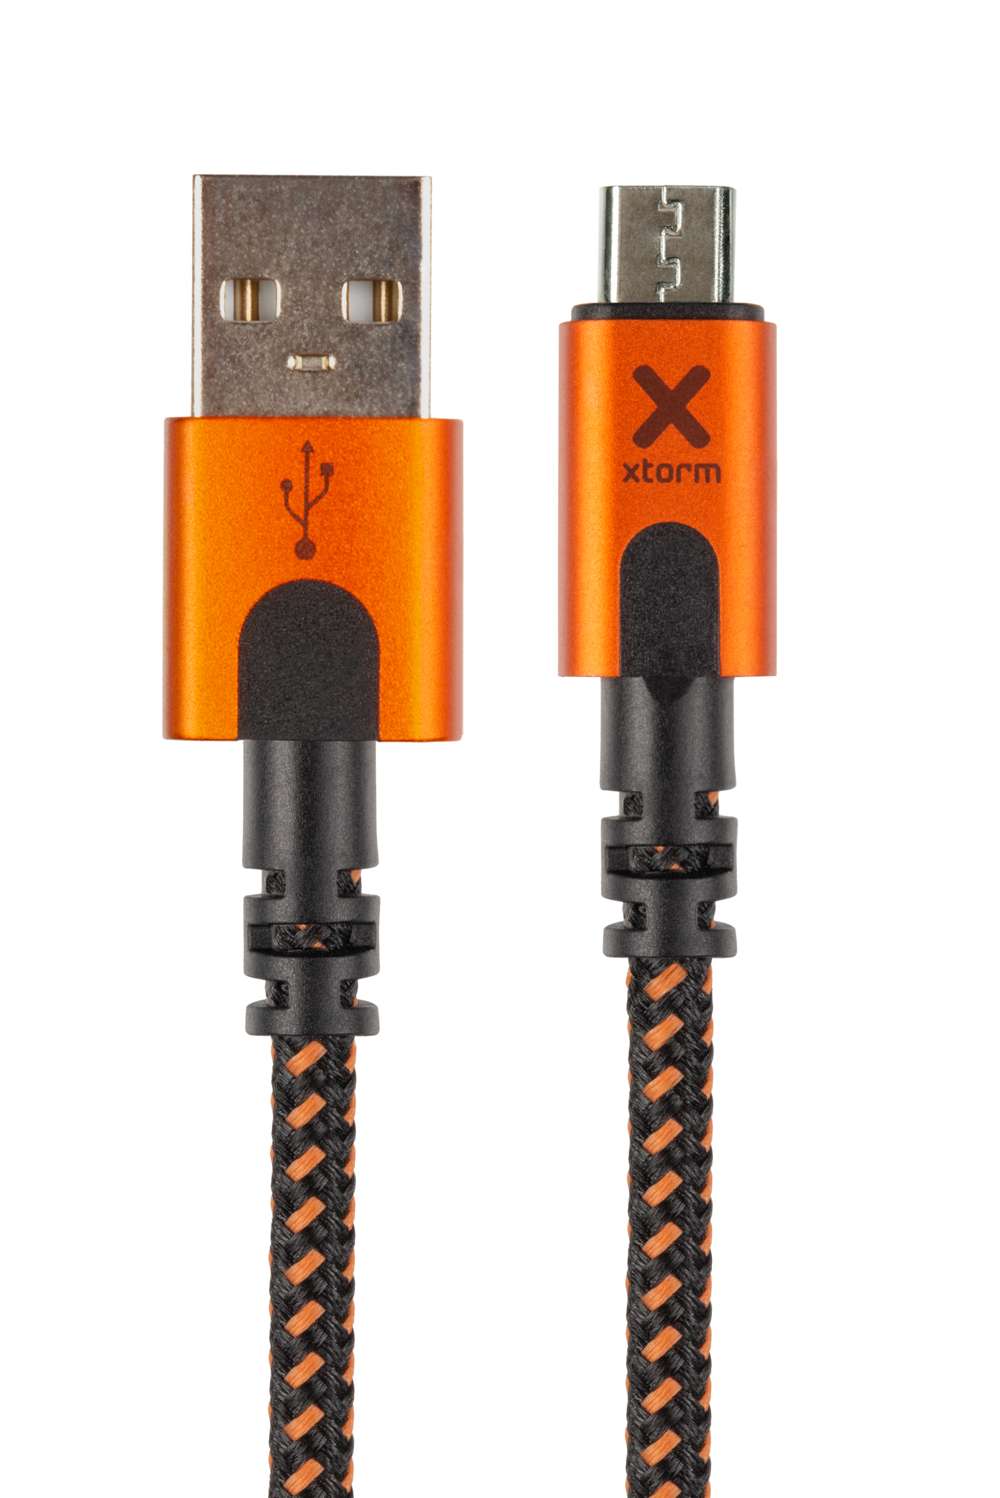 Xtreme USB to Micro USB Cable - 1.5 meter